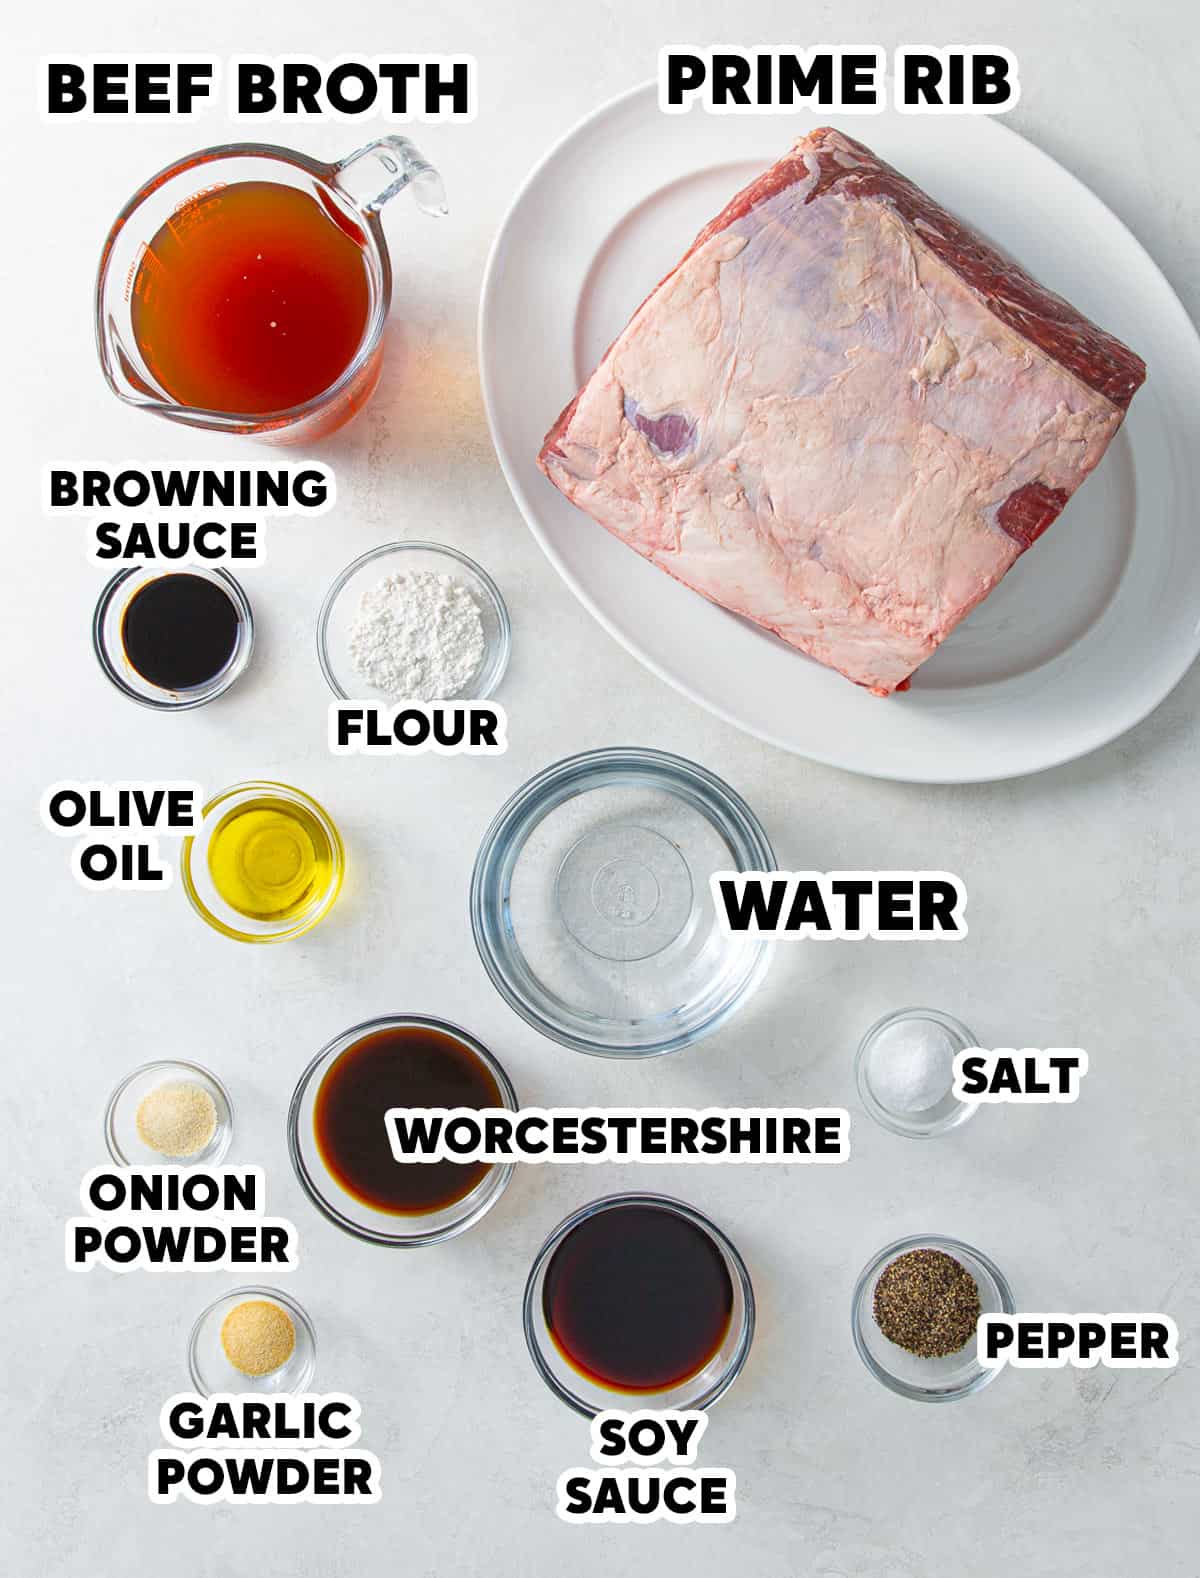 Overhead view of ingredients needed to roast a boneless prime rib with au jus.